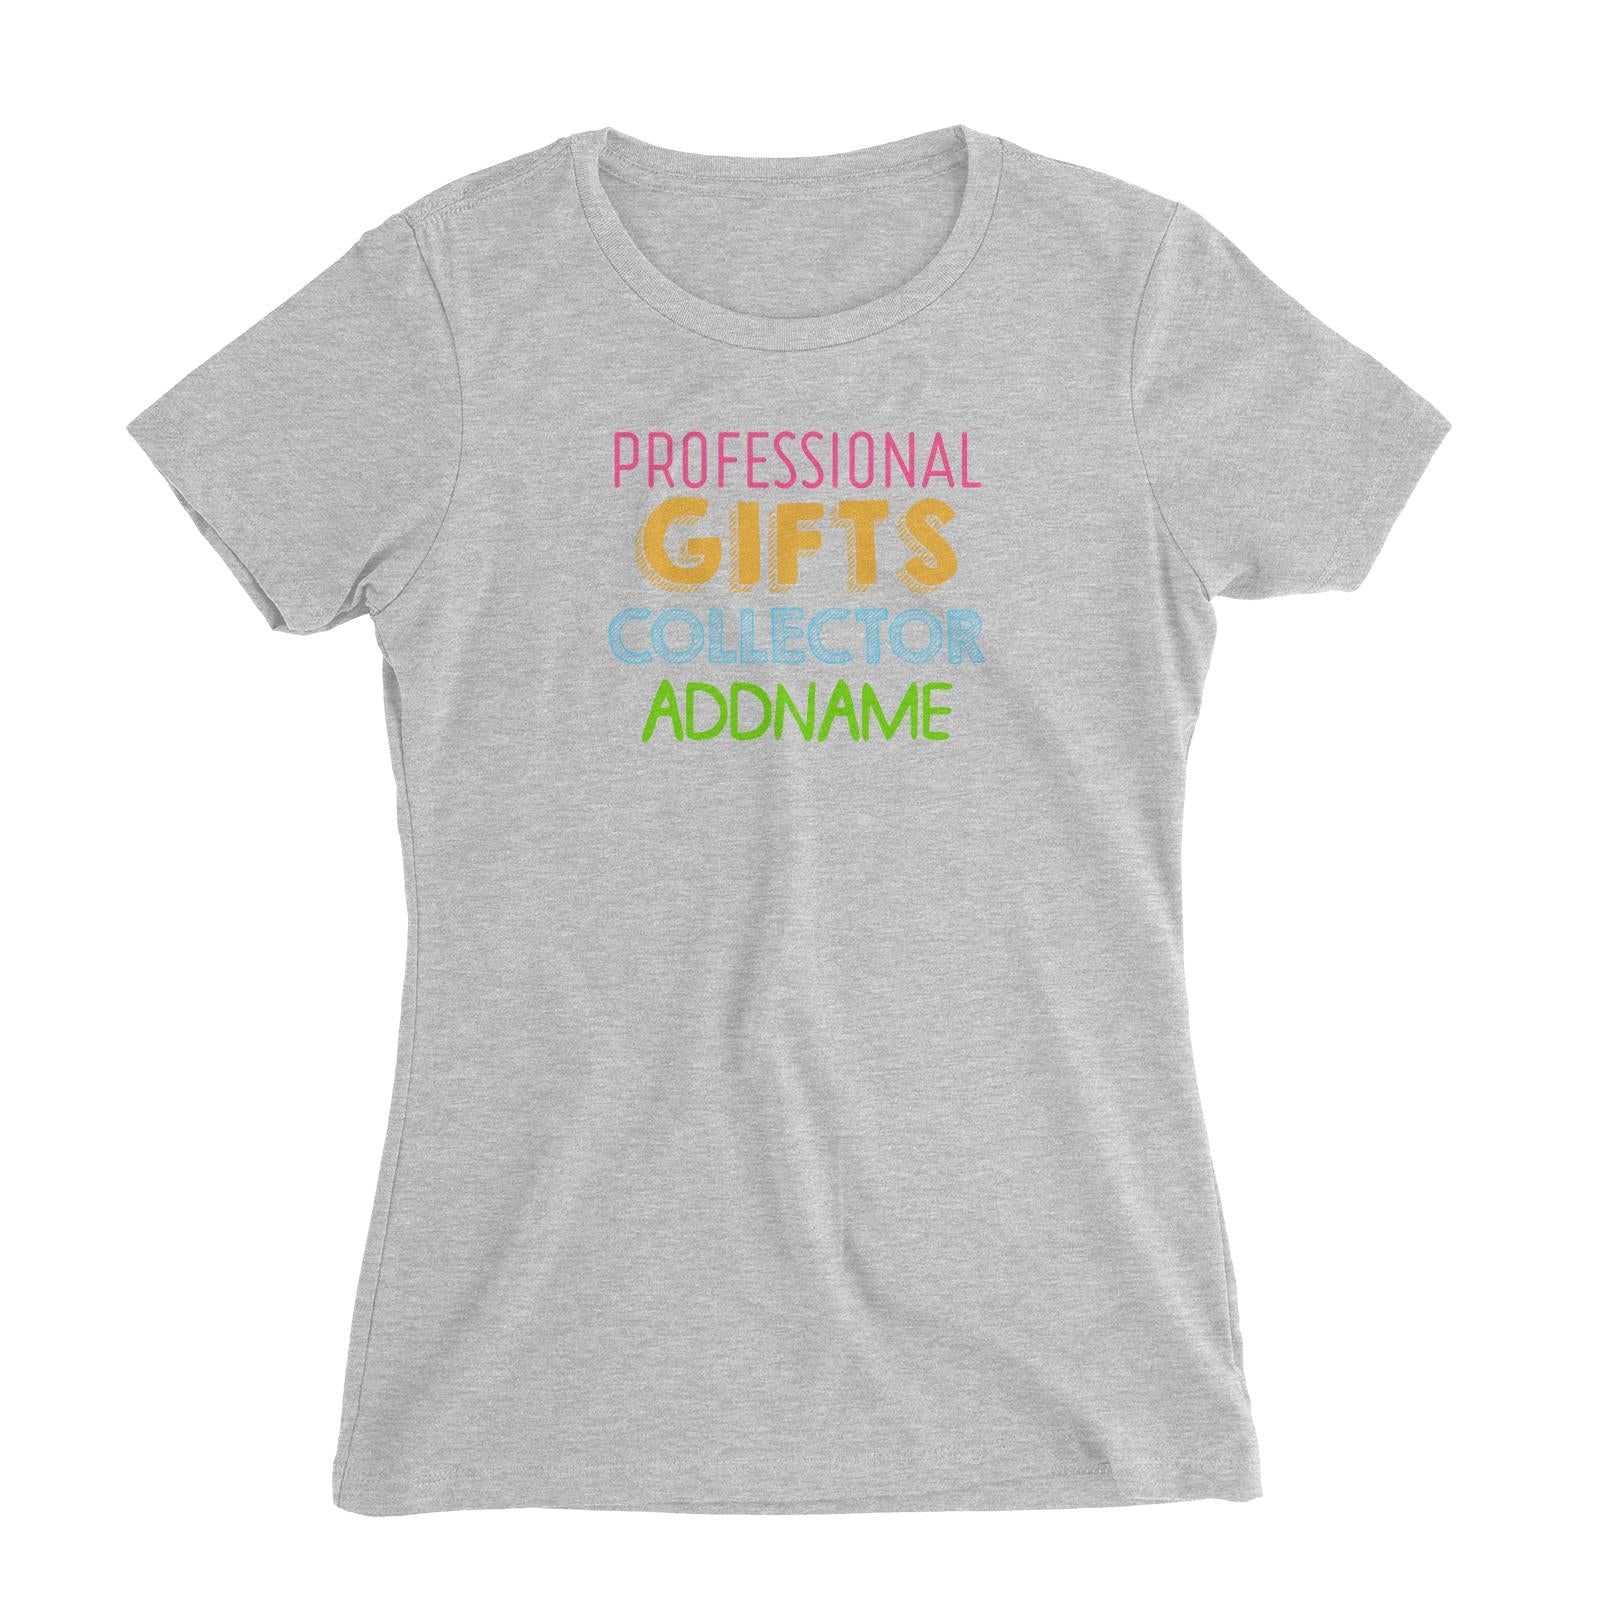 Professional Gifts Collector Addname Women's Slim Fit T-Shirt